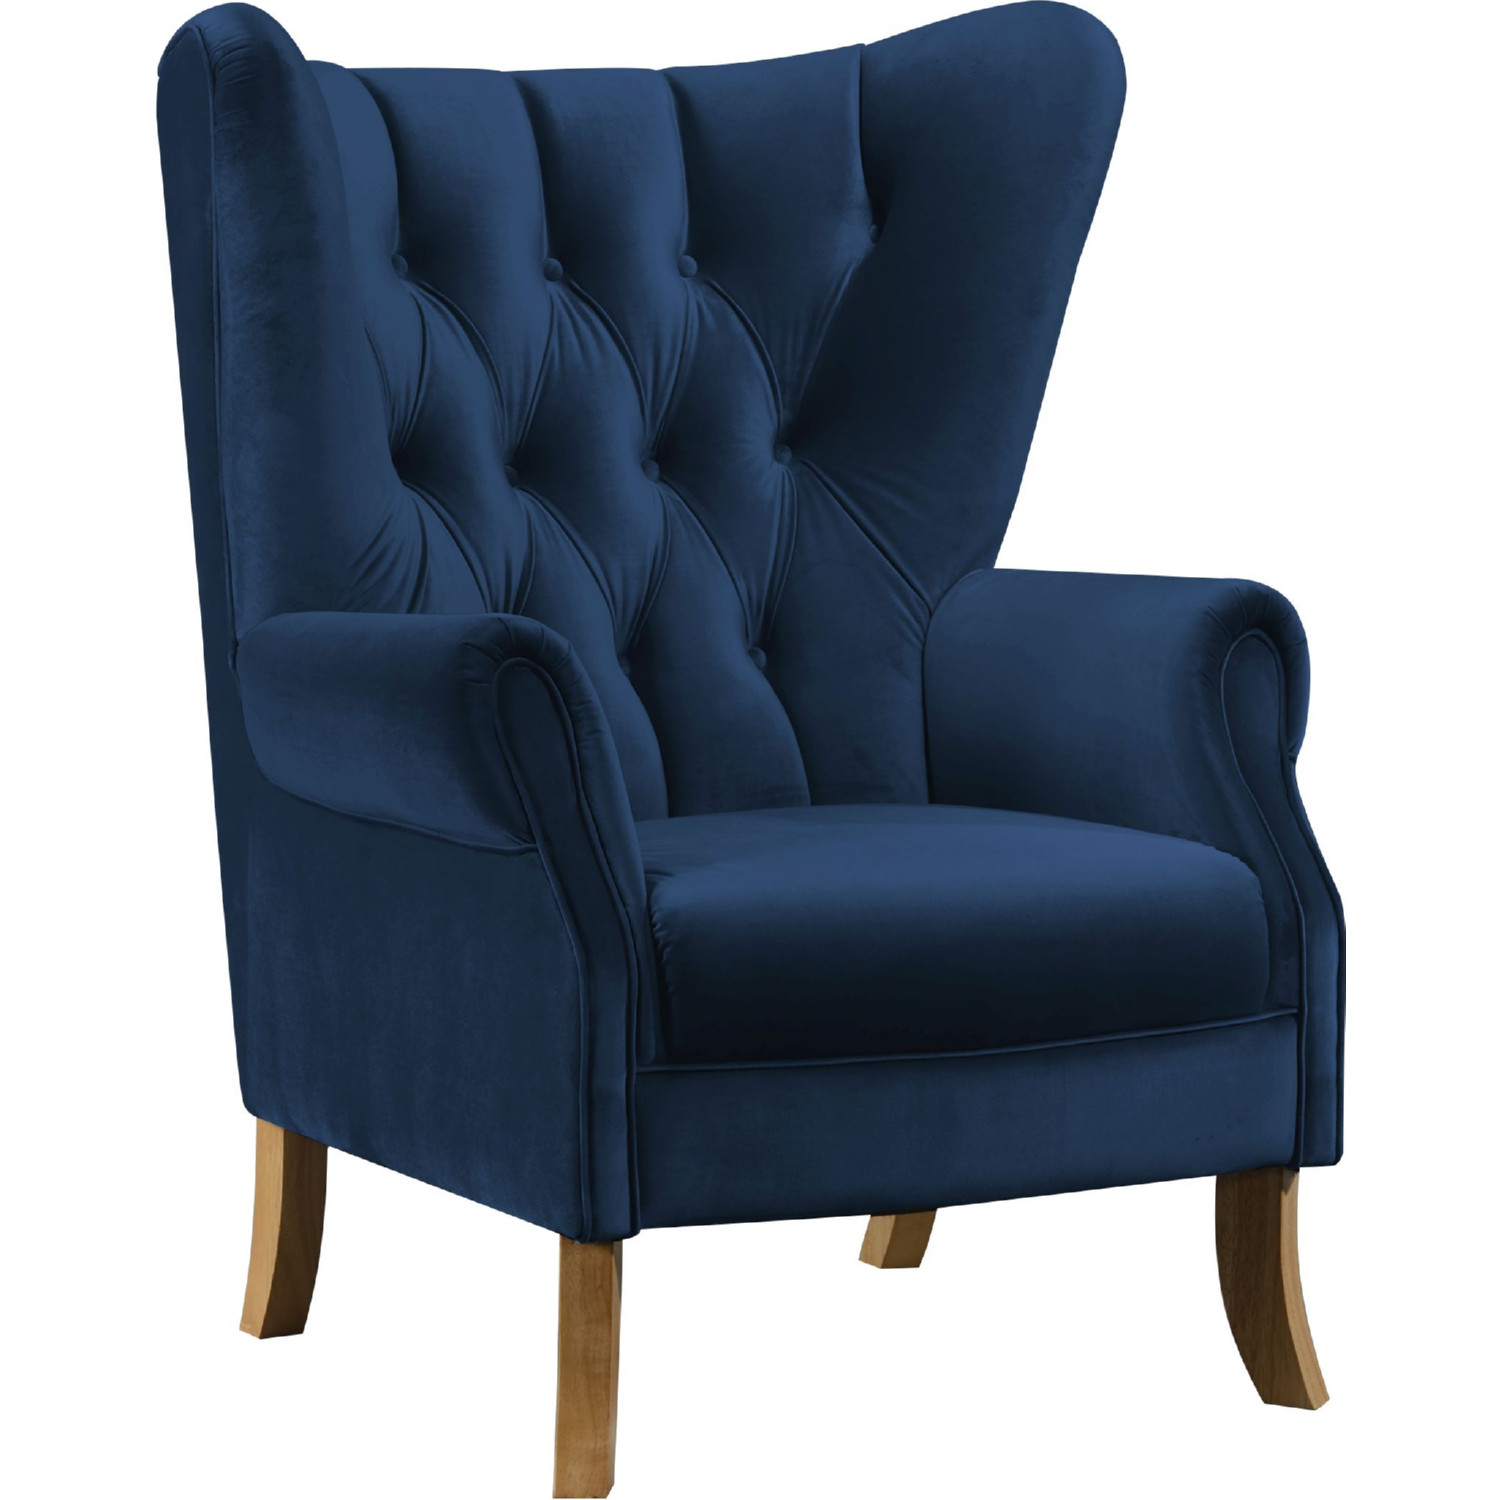 Acme 59519 Adonis Wingback Accent Chair in Tufted Navy